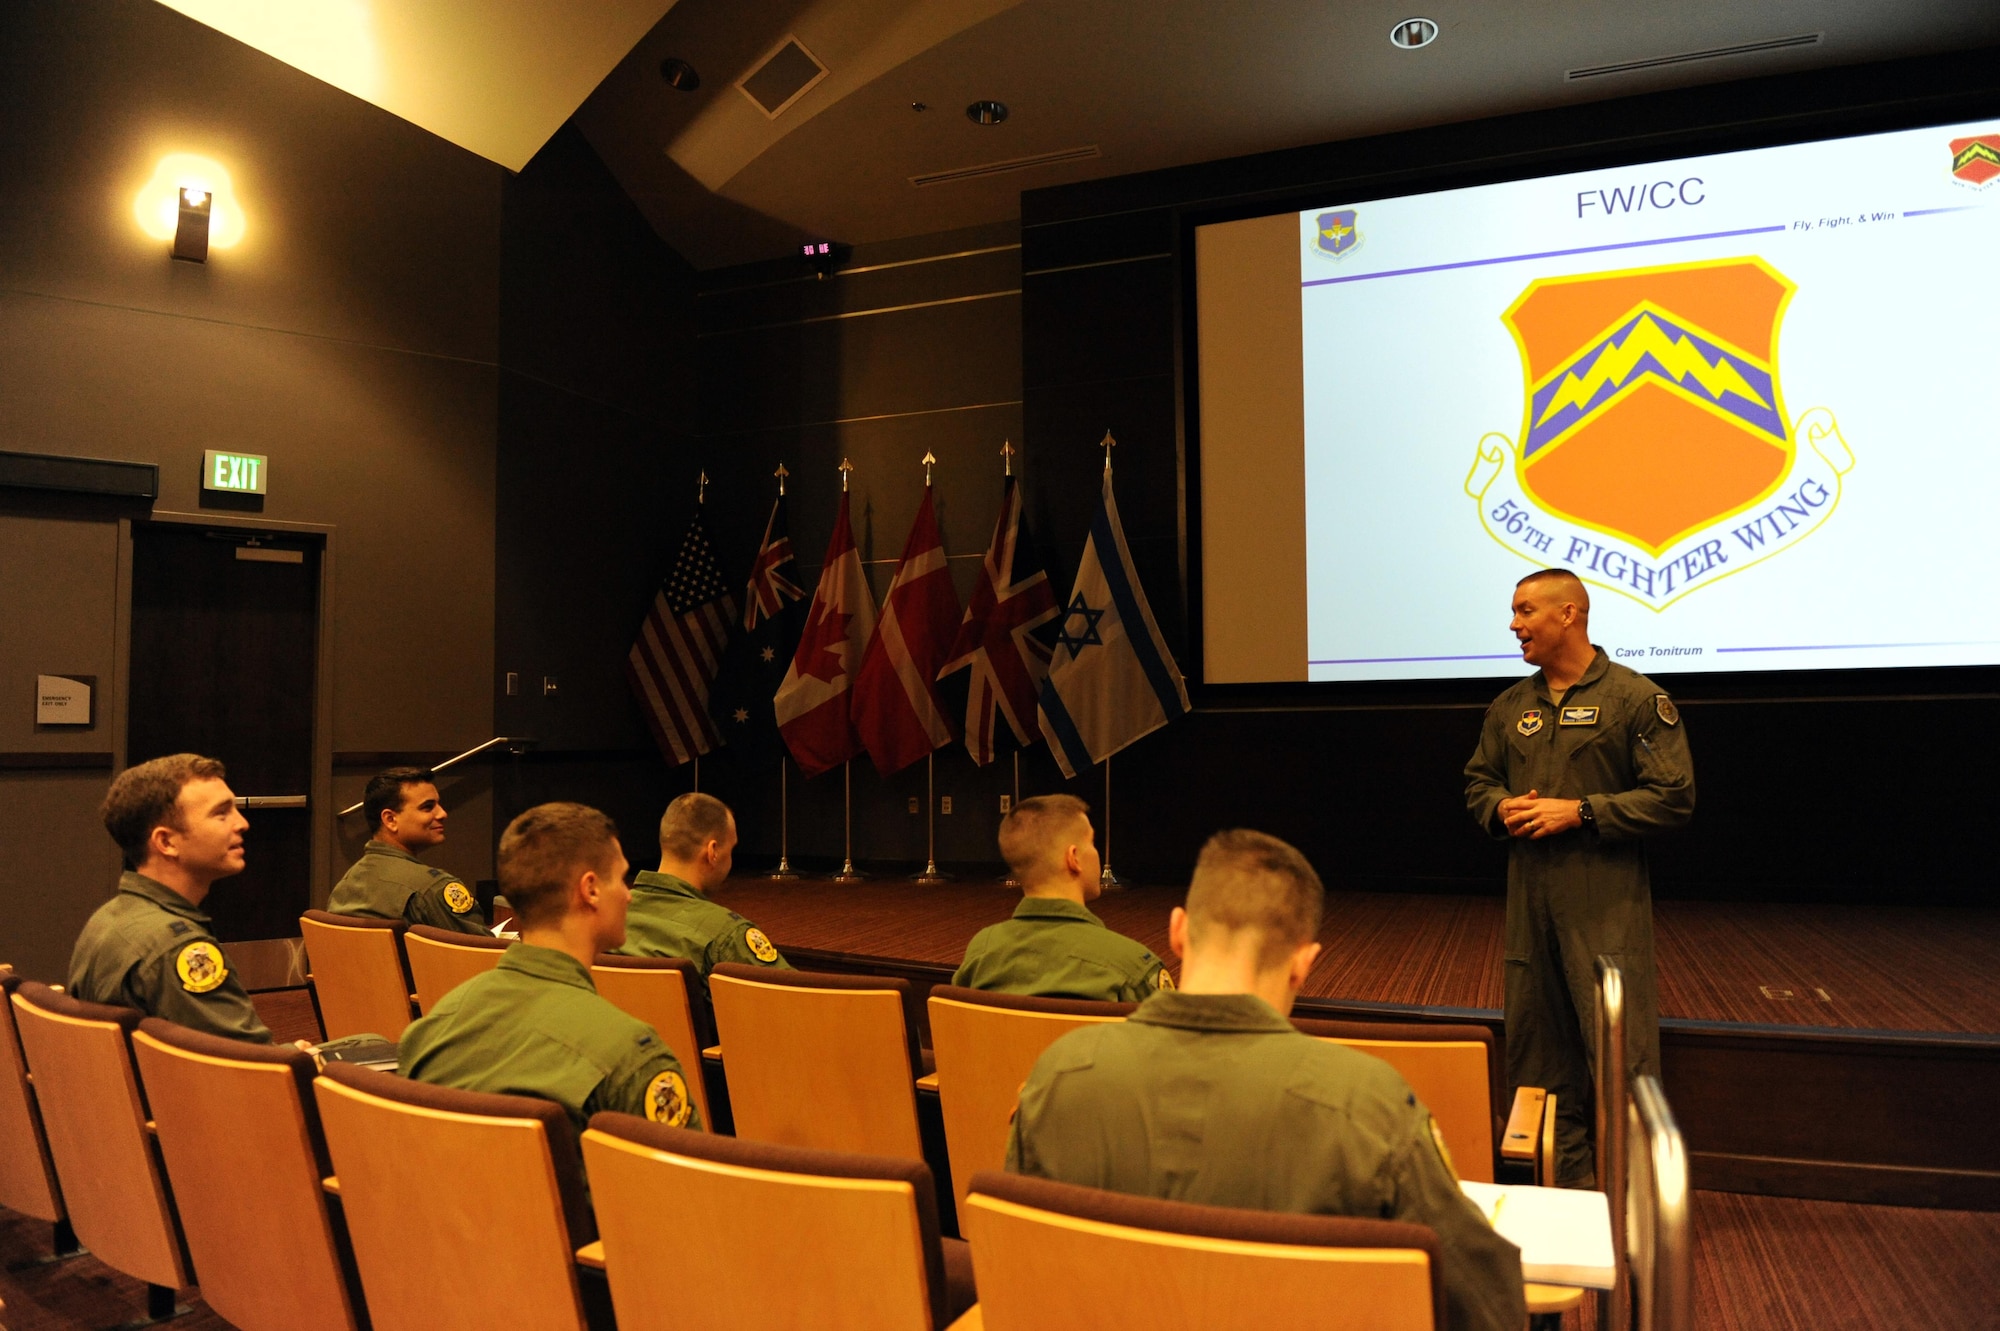 Brig. Gen. Brook Leonard, 56th Fighter Wing commander, welcomes the first class of F-35 Lightning II student pilots to train under the newly made F-35 syllabus Dec. 5, 2016 in the F-35 Academic Training Center auditorium at Luke Air Force Base, Ariz. The syllabus was created to teach pilots without prior fighter jet experience how to fly the F-35. (U.S. Air Force photo by Staff Sgt. Grace Lee) (Released)